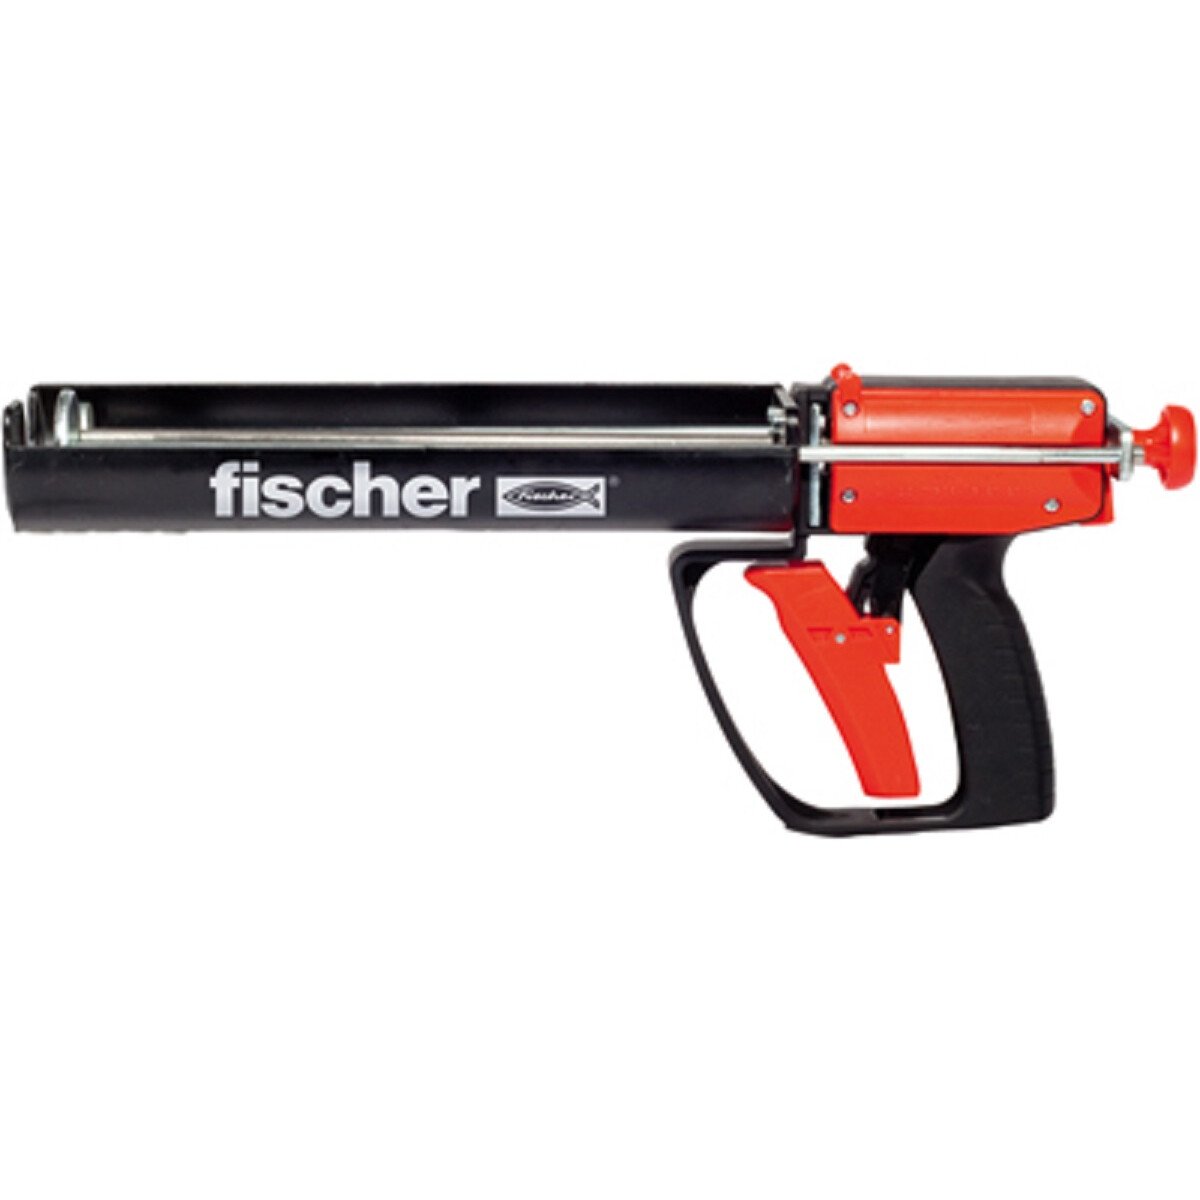 Fischer 510992 Dispenser FIS DM S-L for Chamber Large Cartridges from  Lawson HIS